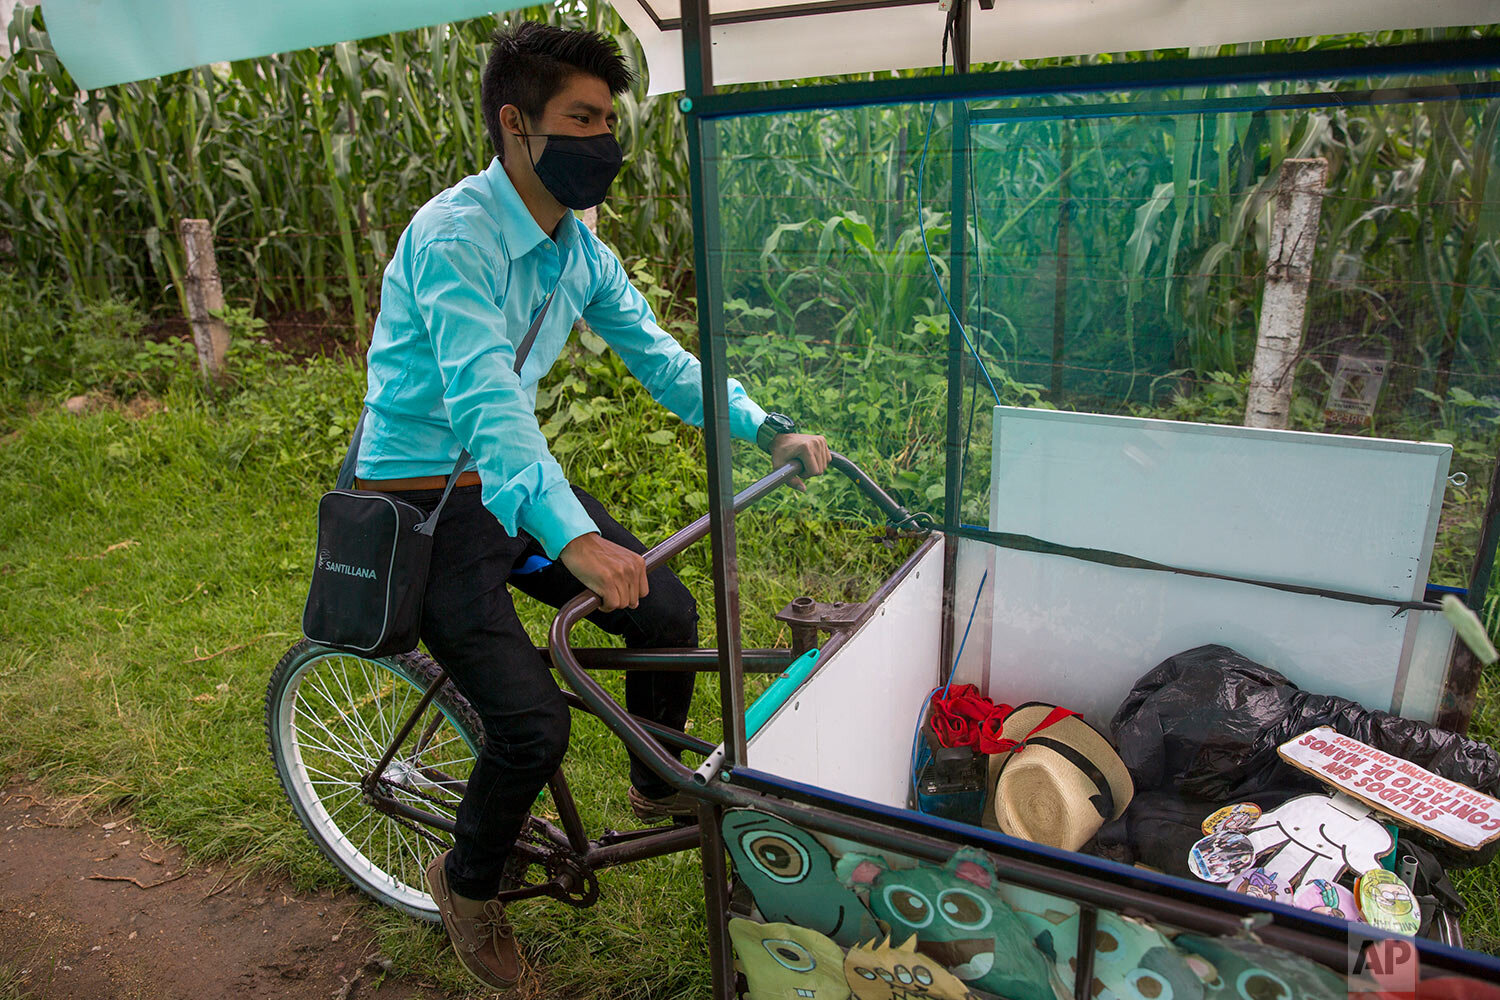  Teacher Gerardo Ixcoy pedals his adult tricycle converted into a mobile classroom past cornfields, in Santa Cruz del Quiche, Guatemala, Wednesday, July 15, 2020. When the novel coronavirus closed Guatemala's schools in mid-March, the 27-year-old inv